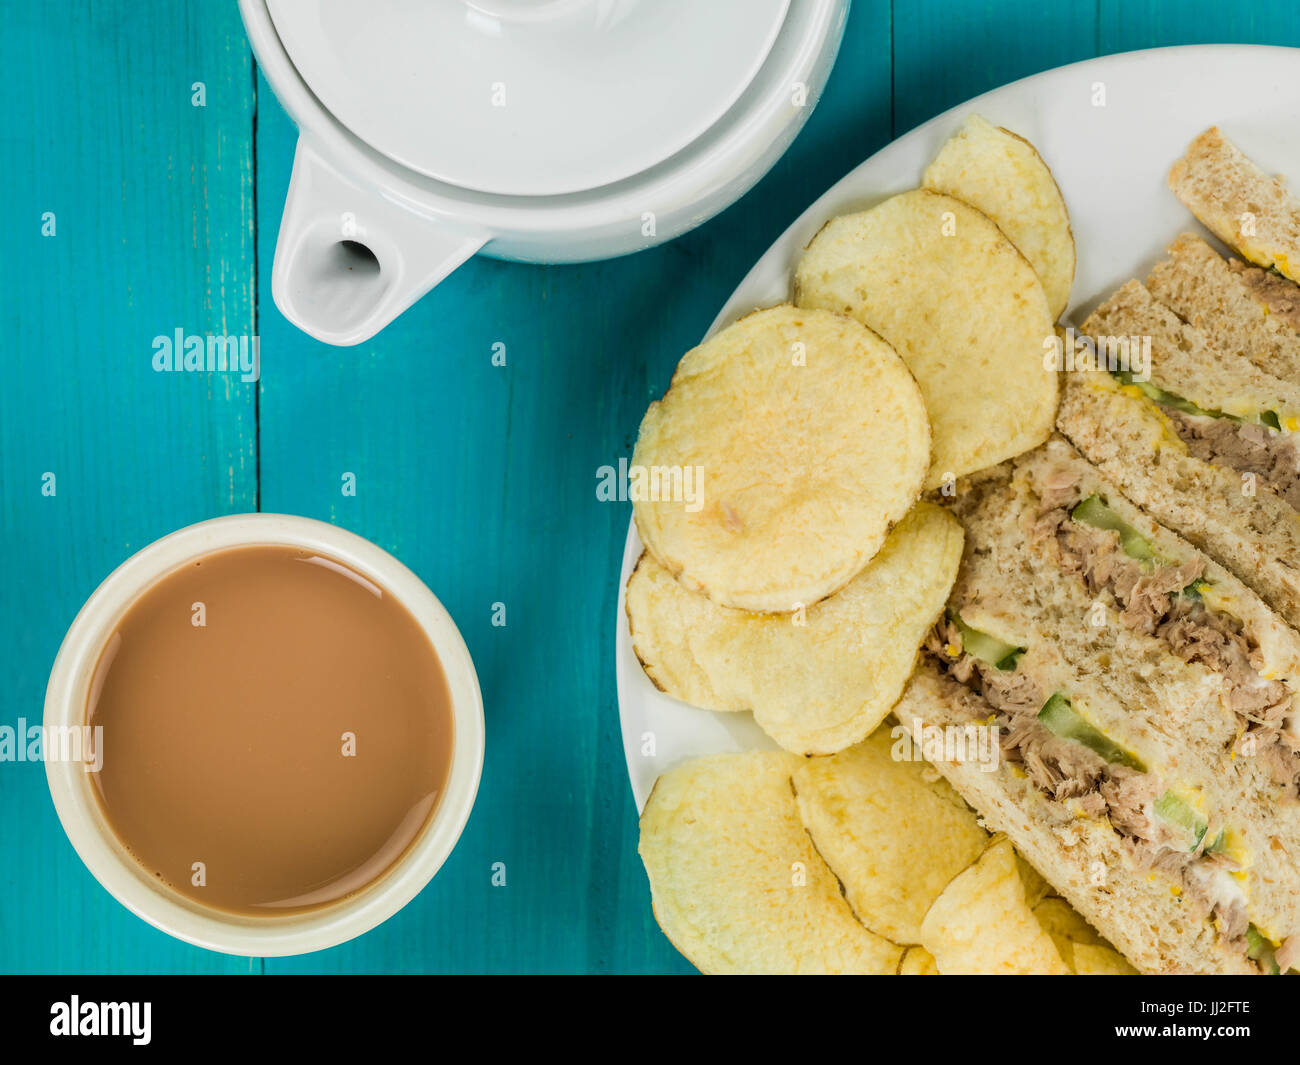 Tuna Sweetcorn and Cucumber Oatmeal Bread Sandwich With Potato Crisps Against a Blue Wooden Background Stock Photo